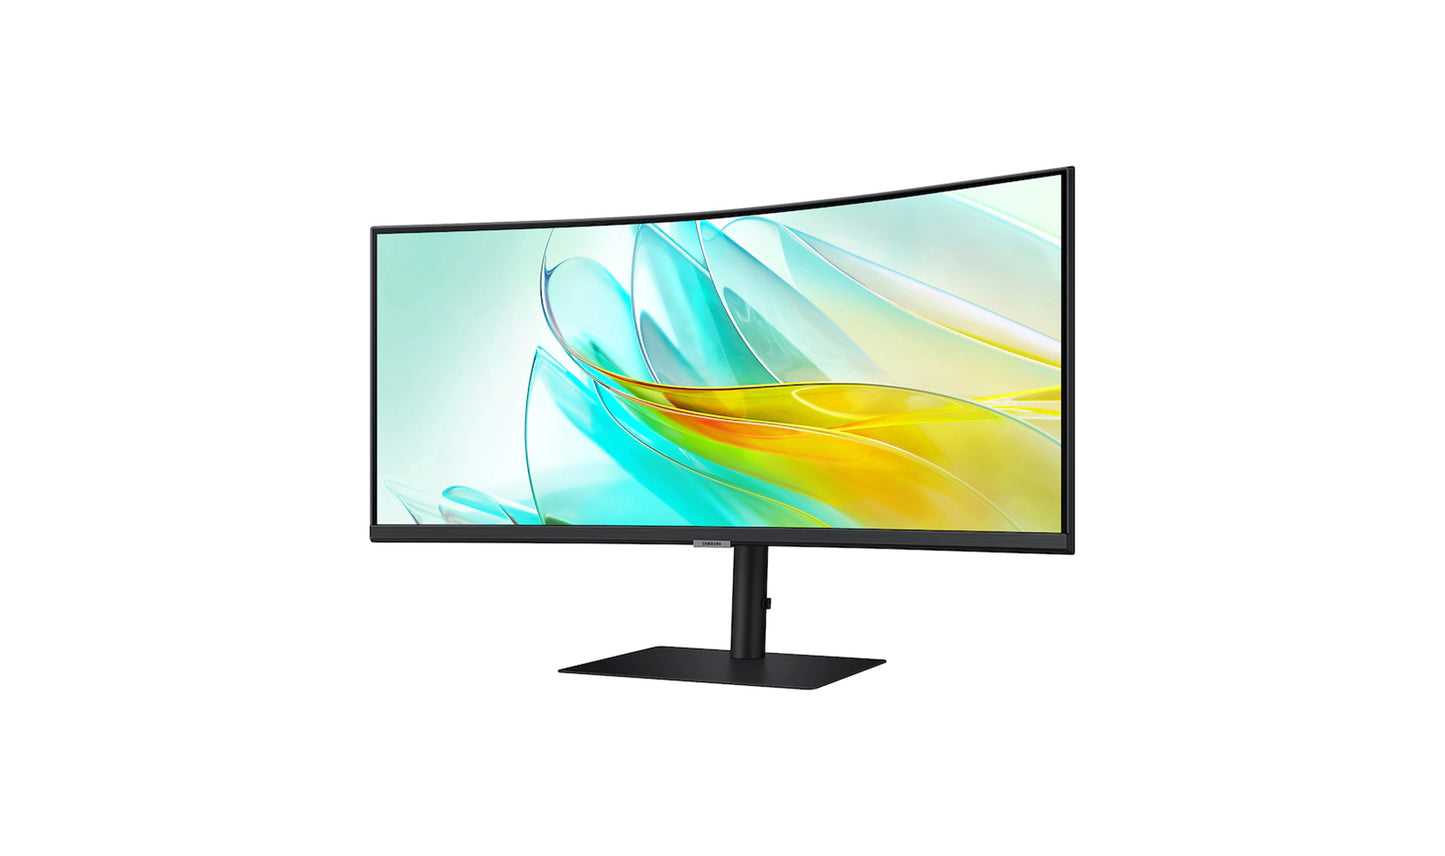 34" ViewFinity S65UC Ultra-WQHD 100Hz AMD FreeSync™ HDR10 Curved Monitor with USB-C and Speakers